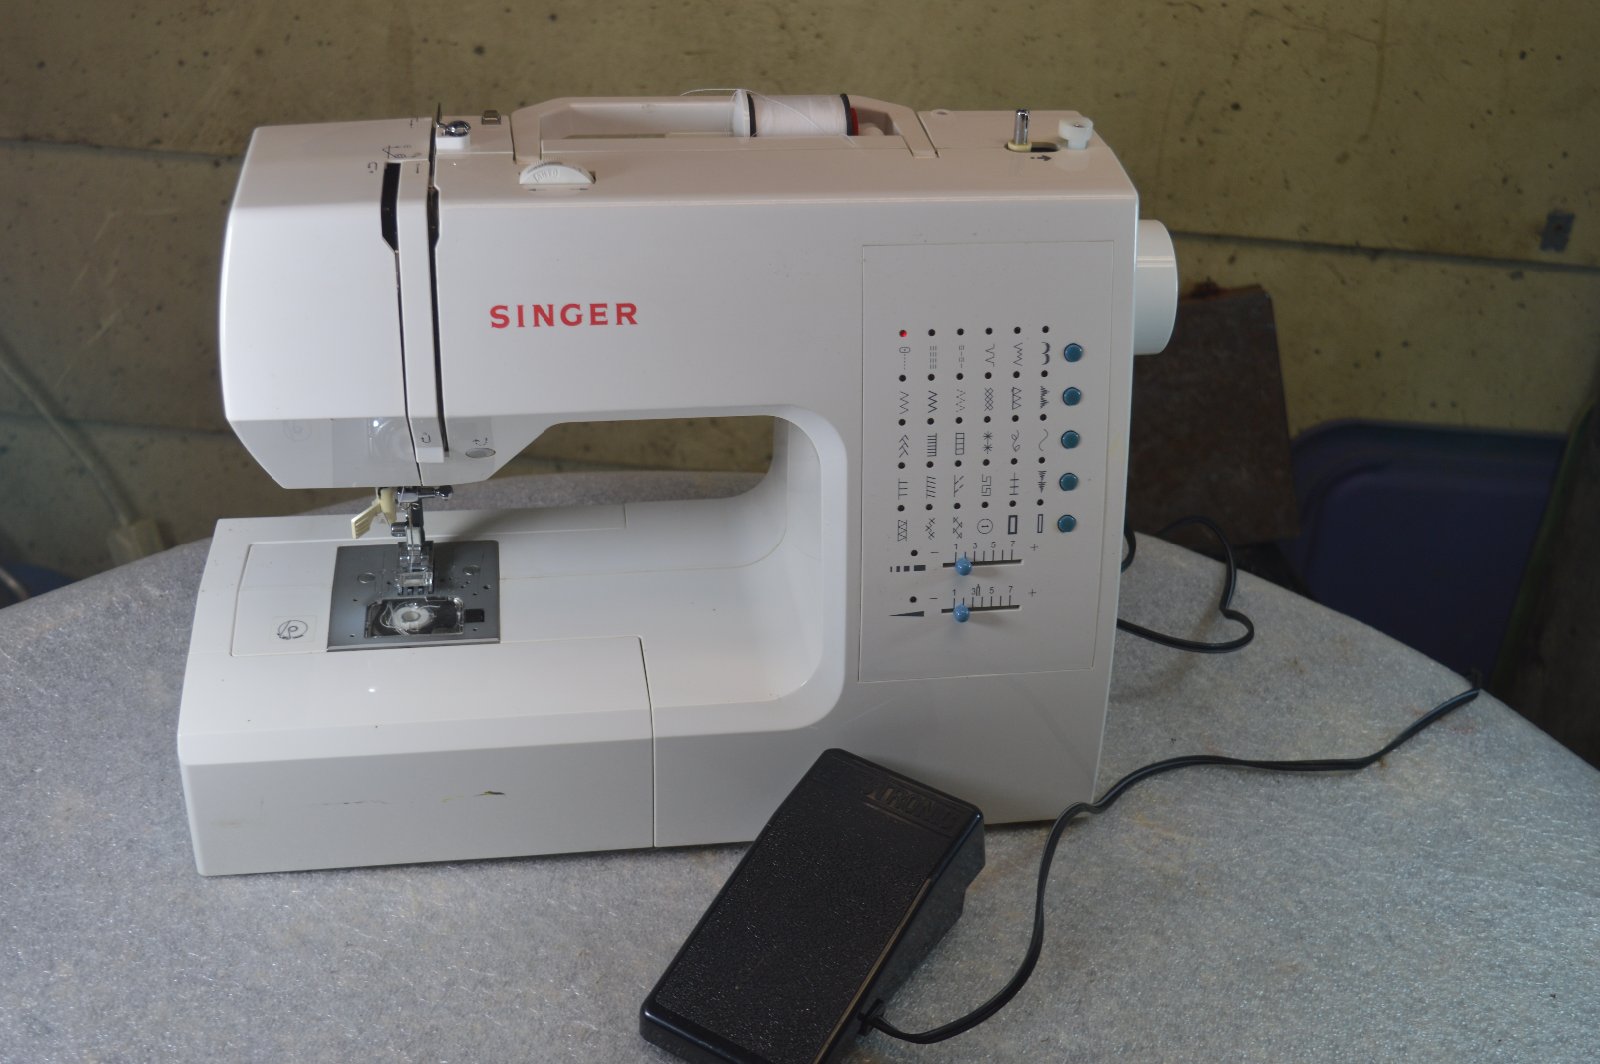 Singer 7442 Electric Sewing Machine Tested Working 37431744210 Ebay 3999